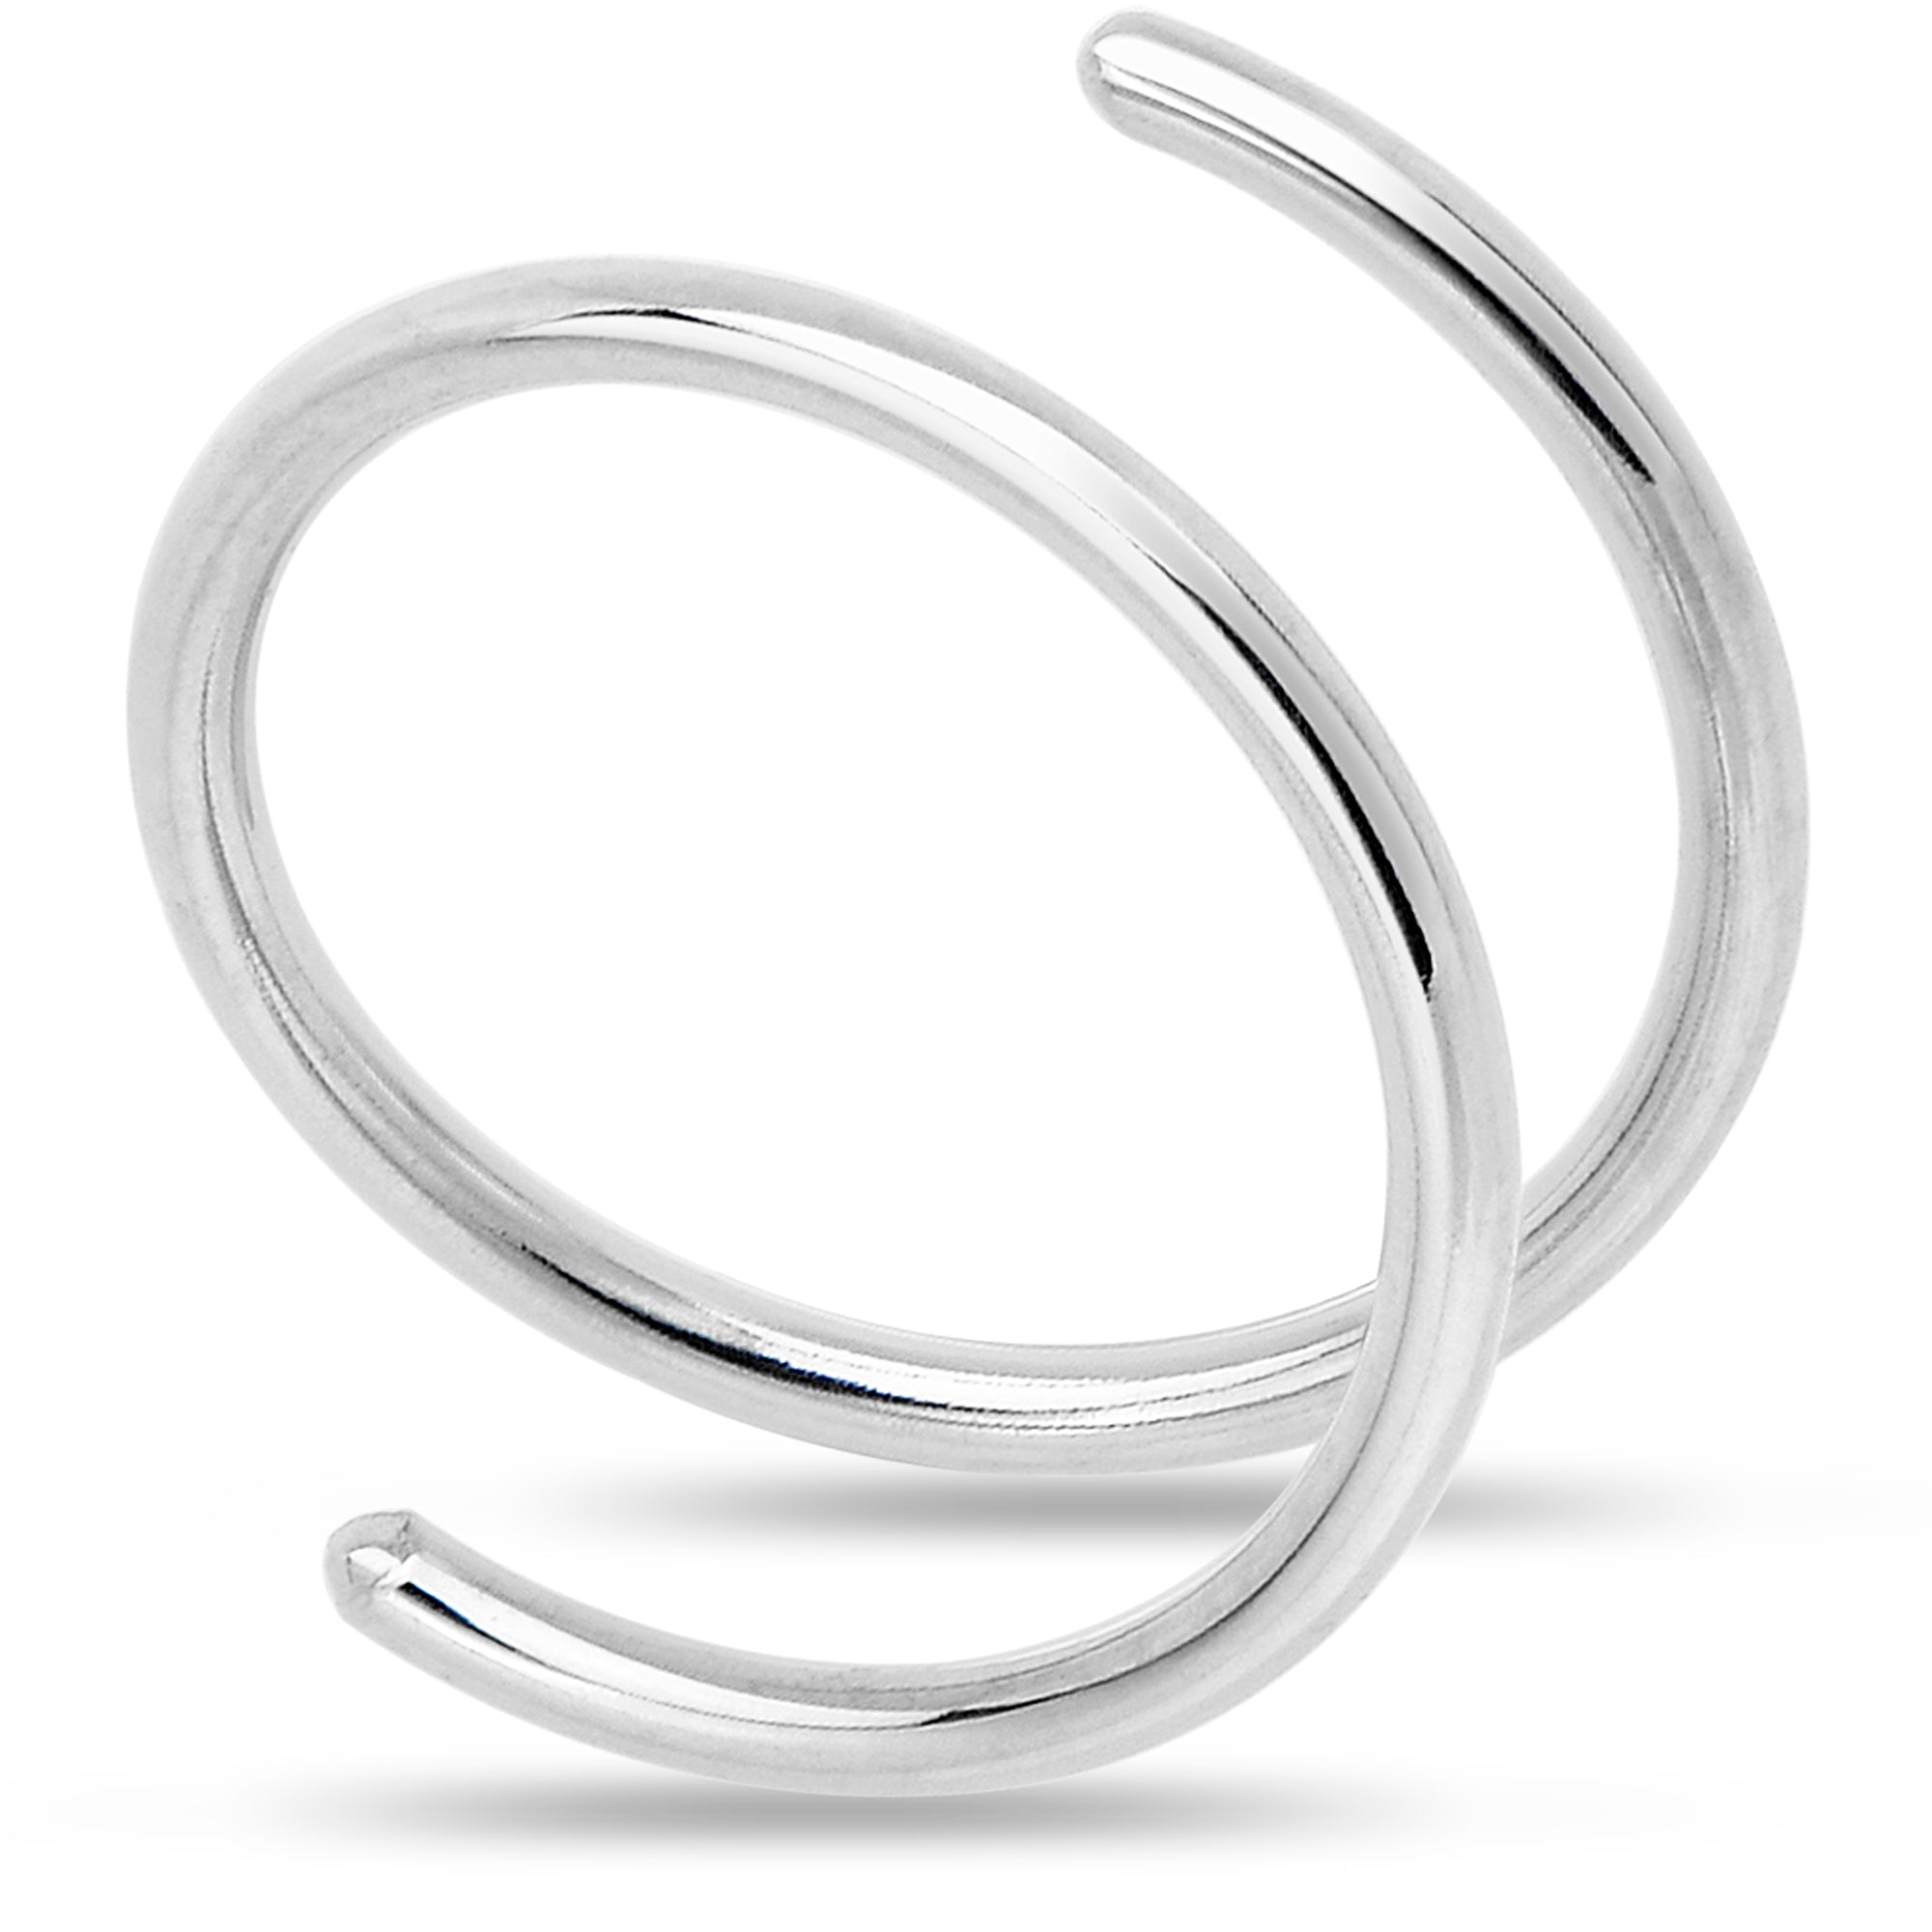 Spiralling Silver Nose Ring | Nose Jewellery - Tribu